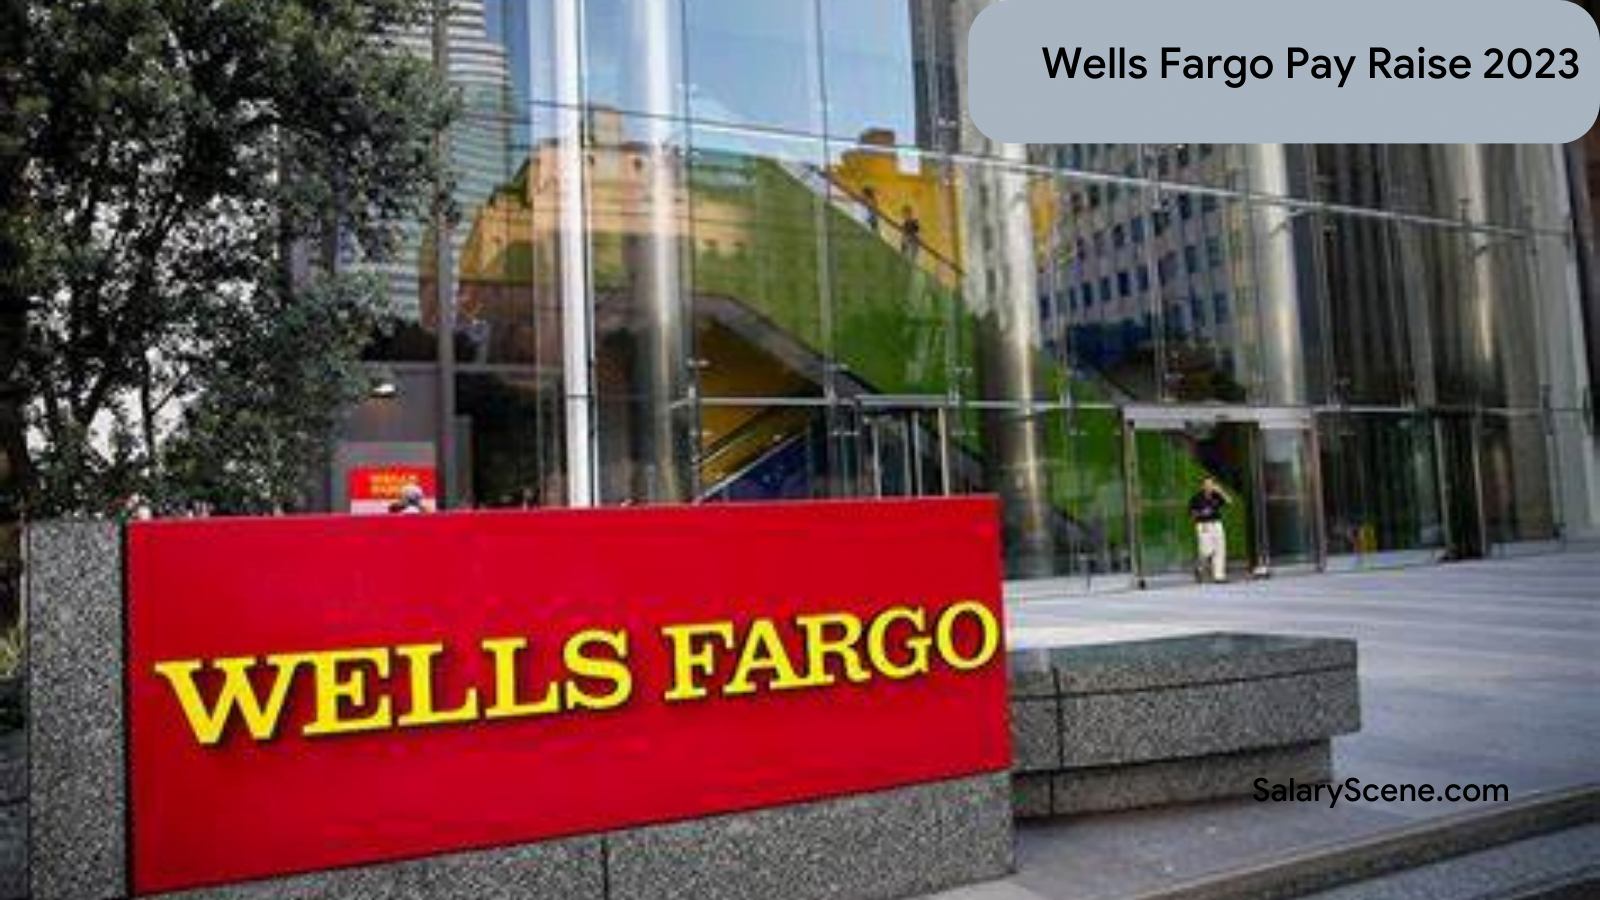 Wells Fargo Pay Raise 2023 A Boost for Employee Prosperity and Company